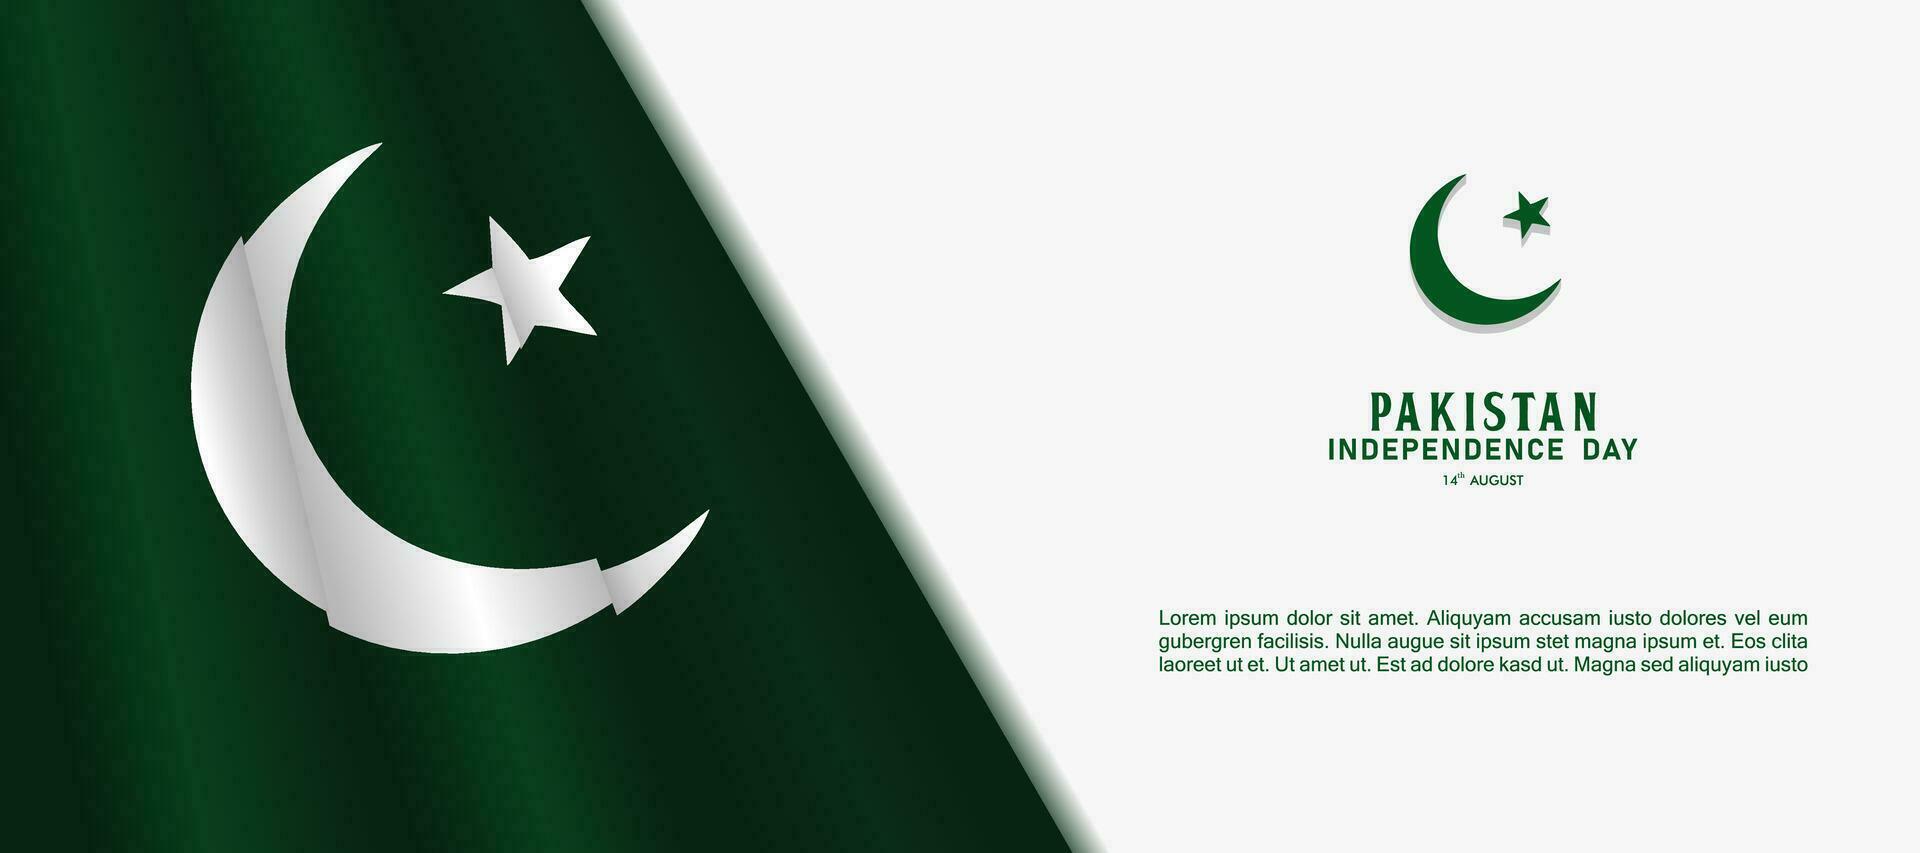 Happy Independence Day Republic Of Pakistan, 14 august. greeting card with white and green colors design vector